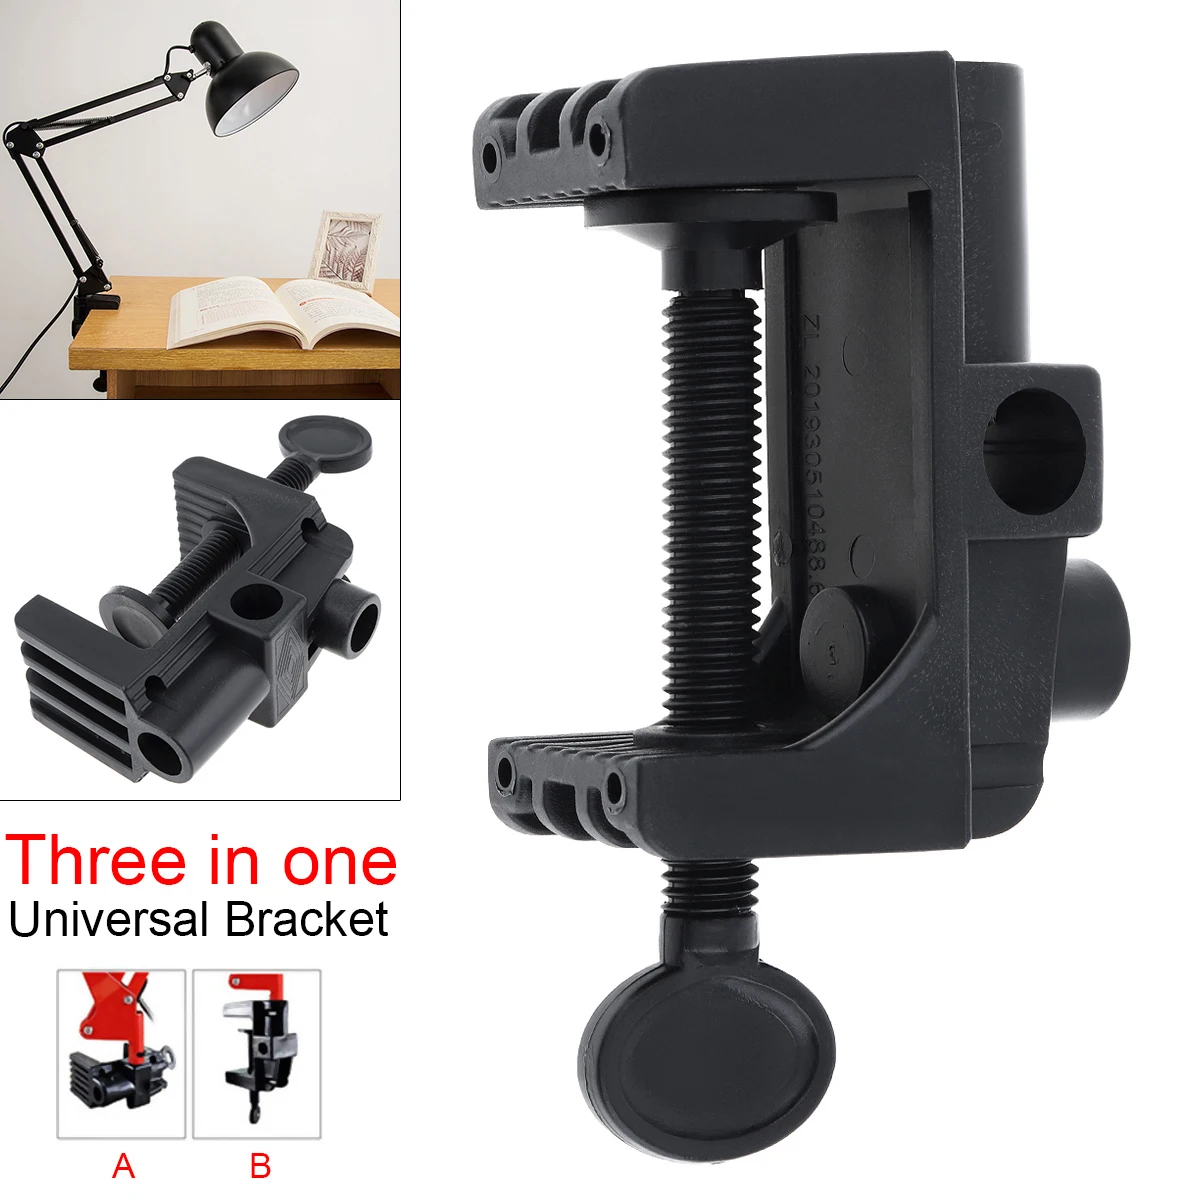 Desk Lamp Mount Holder C-Shape Made of Plastic DIY Fixed Clip for Table Light / Microphone / Camera